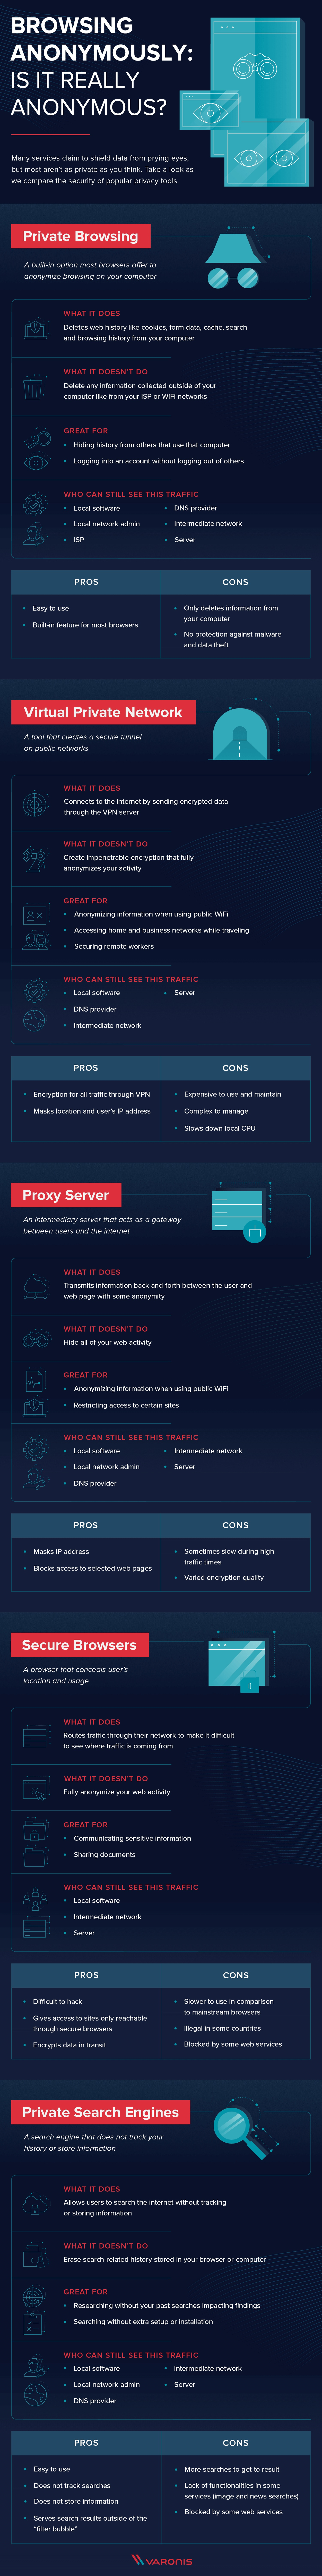 browsing-anonymously-questions-infographic